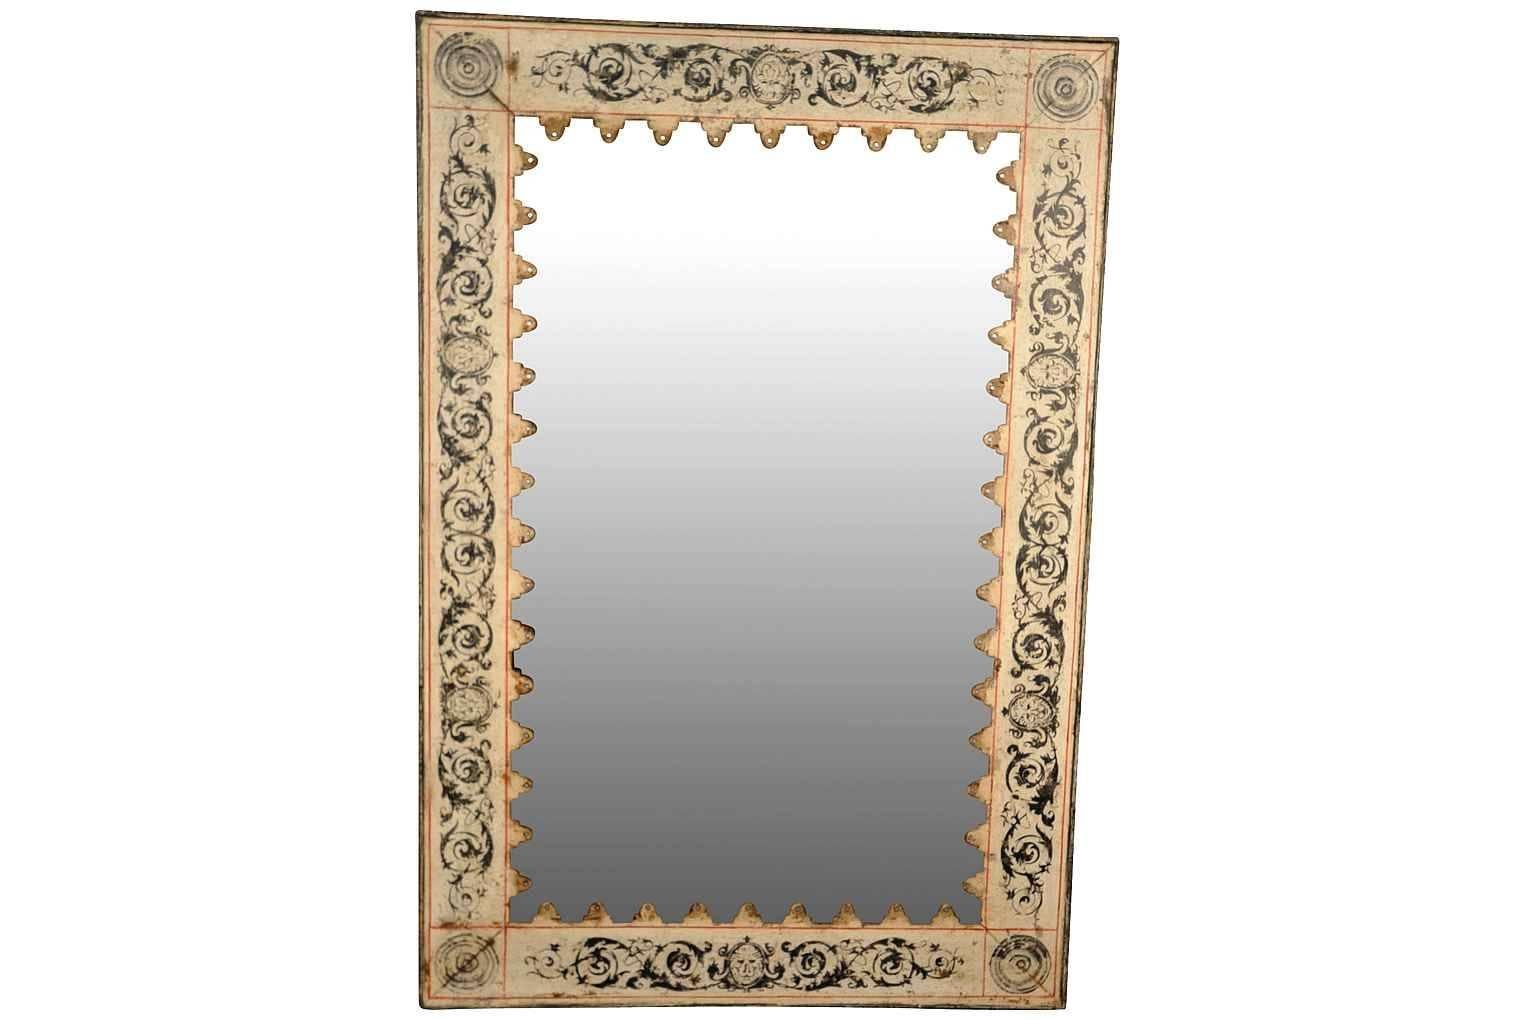 Pair of terrific mirrors constructed from wood that is clad in antique reclaimed metal and painted. Fabulous finish!!! The glass is slightly crazed for added charm. The mirrors may be sold individually. The price per piece is $3625.